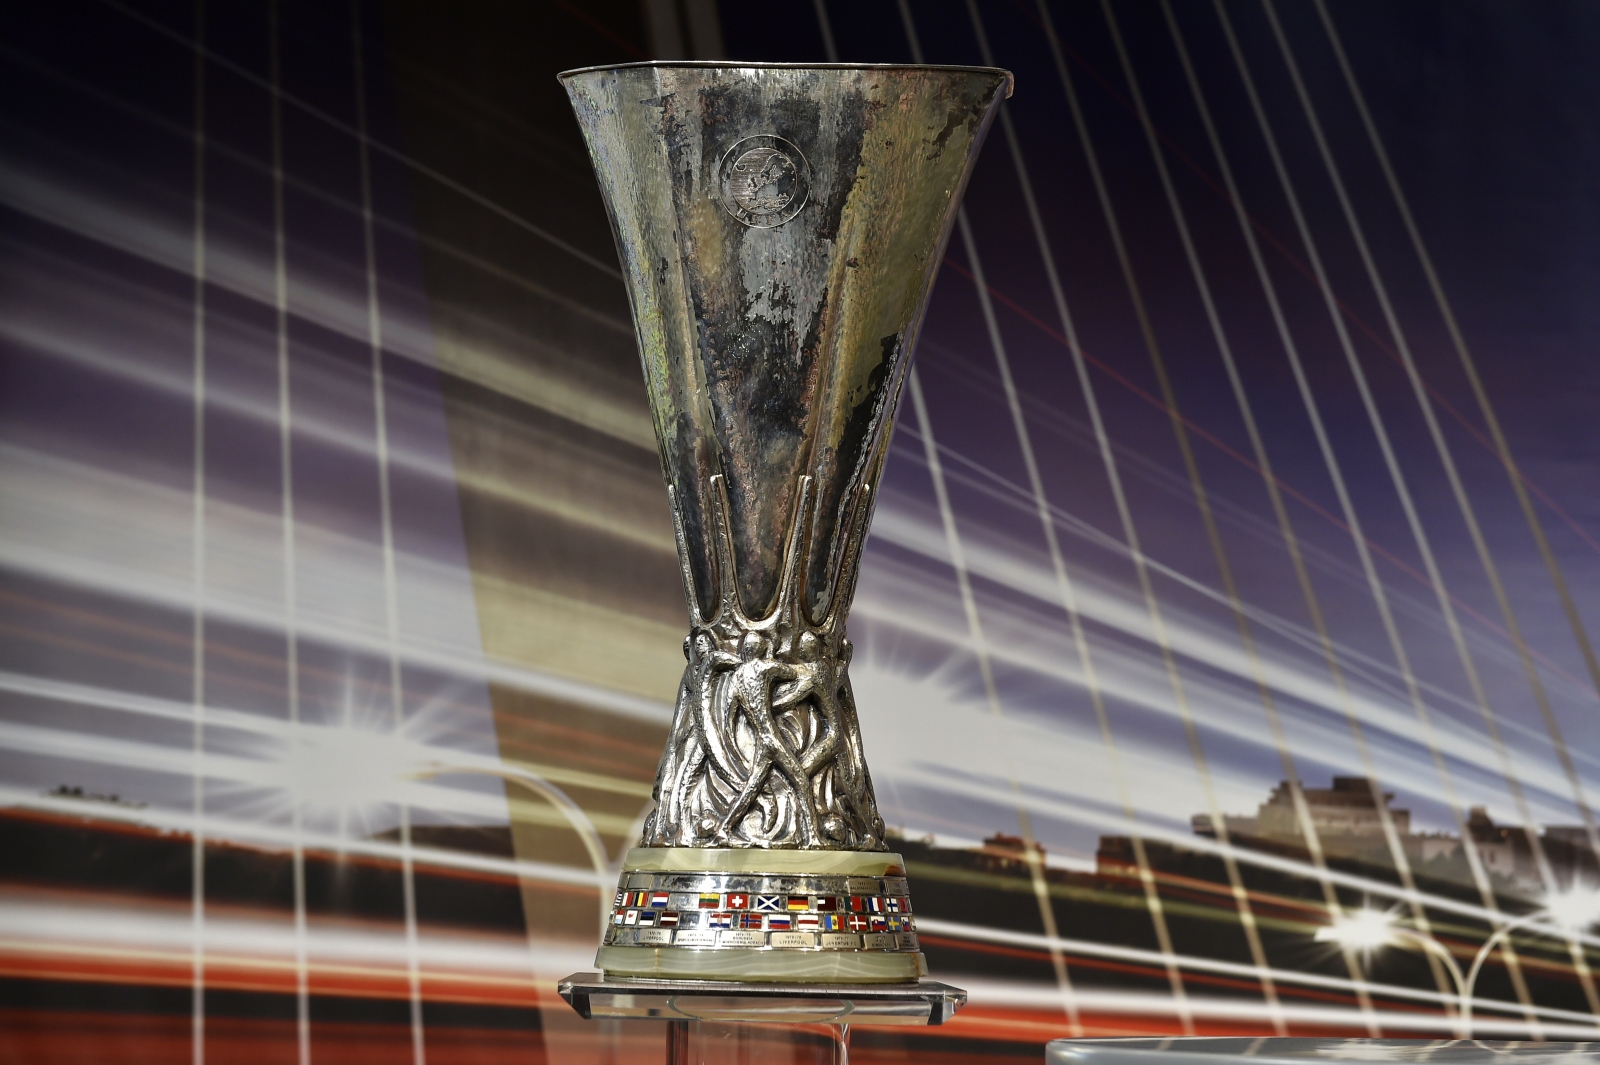 Uefa Europa League semi-final draw: Where to watch and preview